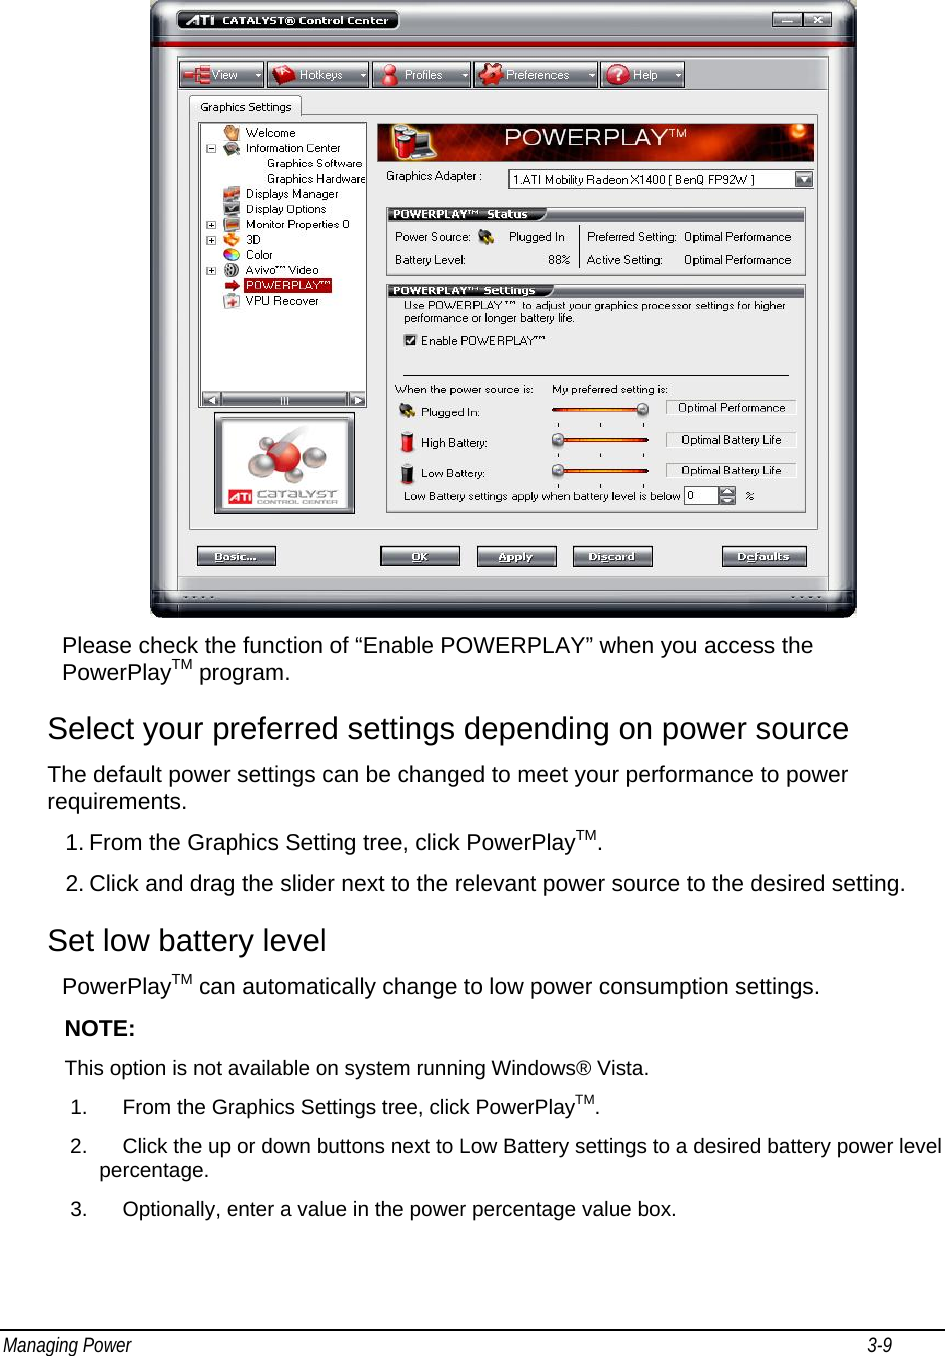 Managing Power                                                                                                                                                           3-9                                     Please check the function of “Enable POWERPLAY” when you access the PowerPlayTM program.  Select your preferred settings depending on power source The default power settings can be changed to meet your performance to power requirements. 1. From the Graphics Setting tree, click PowerPlayTM. 2. Click and drag the slider next to the relevant power source to the desired setting. Set low battery level PowerPlayTM can automatically change to low power consumption settings. NOTE: This option is not available on system running Windows® Vista. 1.  From the Graphics Settings tree, click PowerPlayTM. 2.  Click the up or down buttons next to Low Battery settings to a desired battery power level percentage. 3.  Optionally, enter a value in the power percentage value box. 